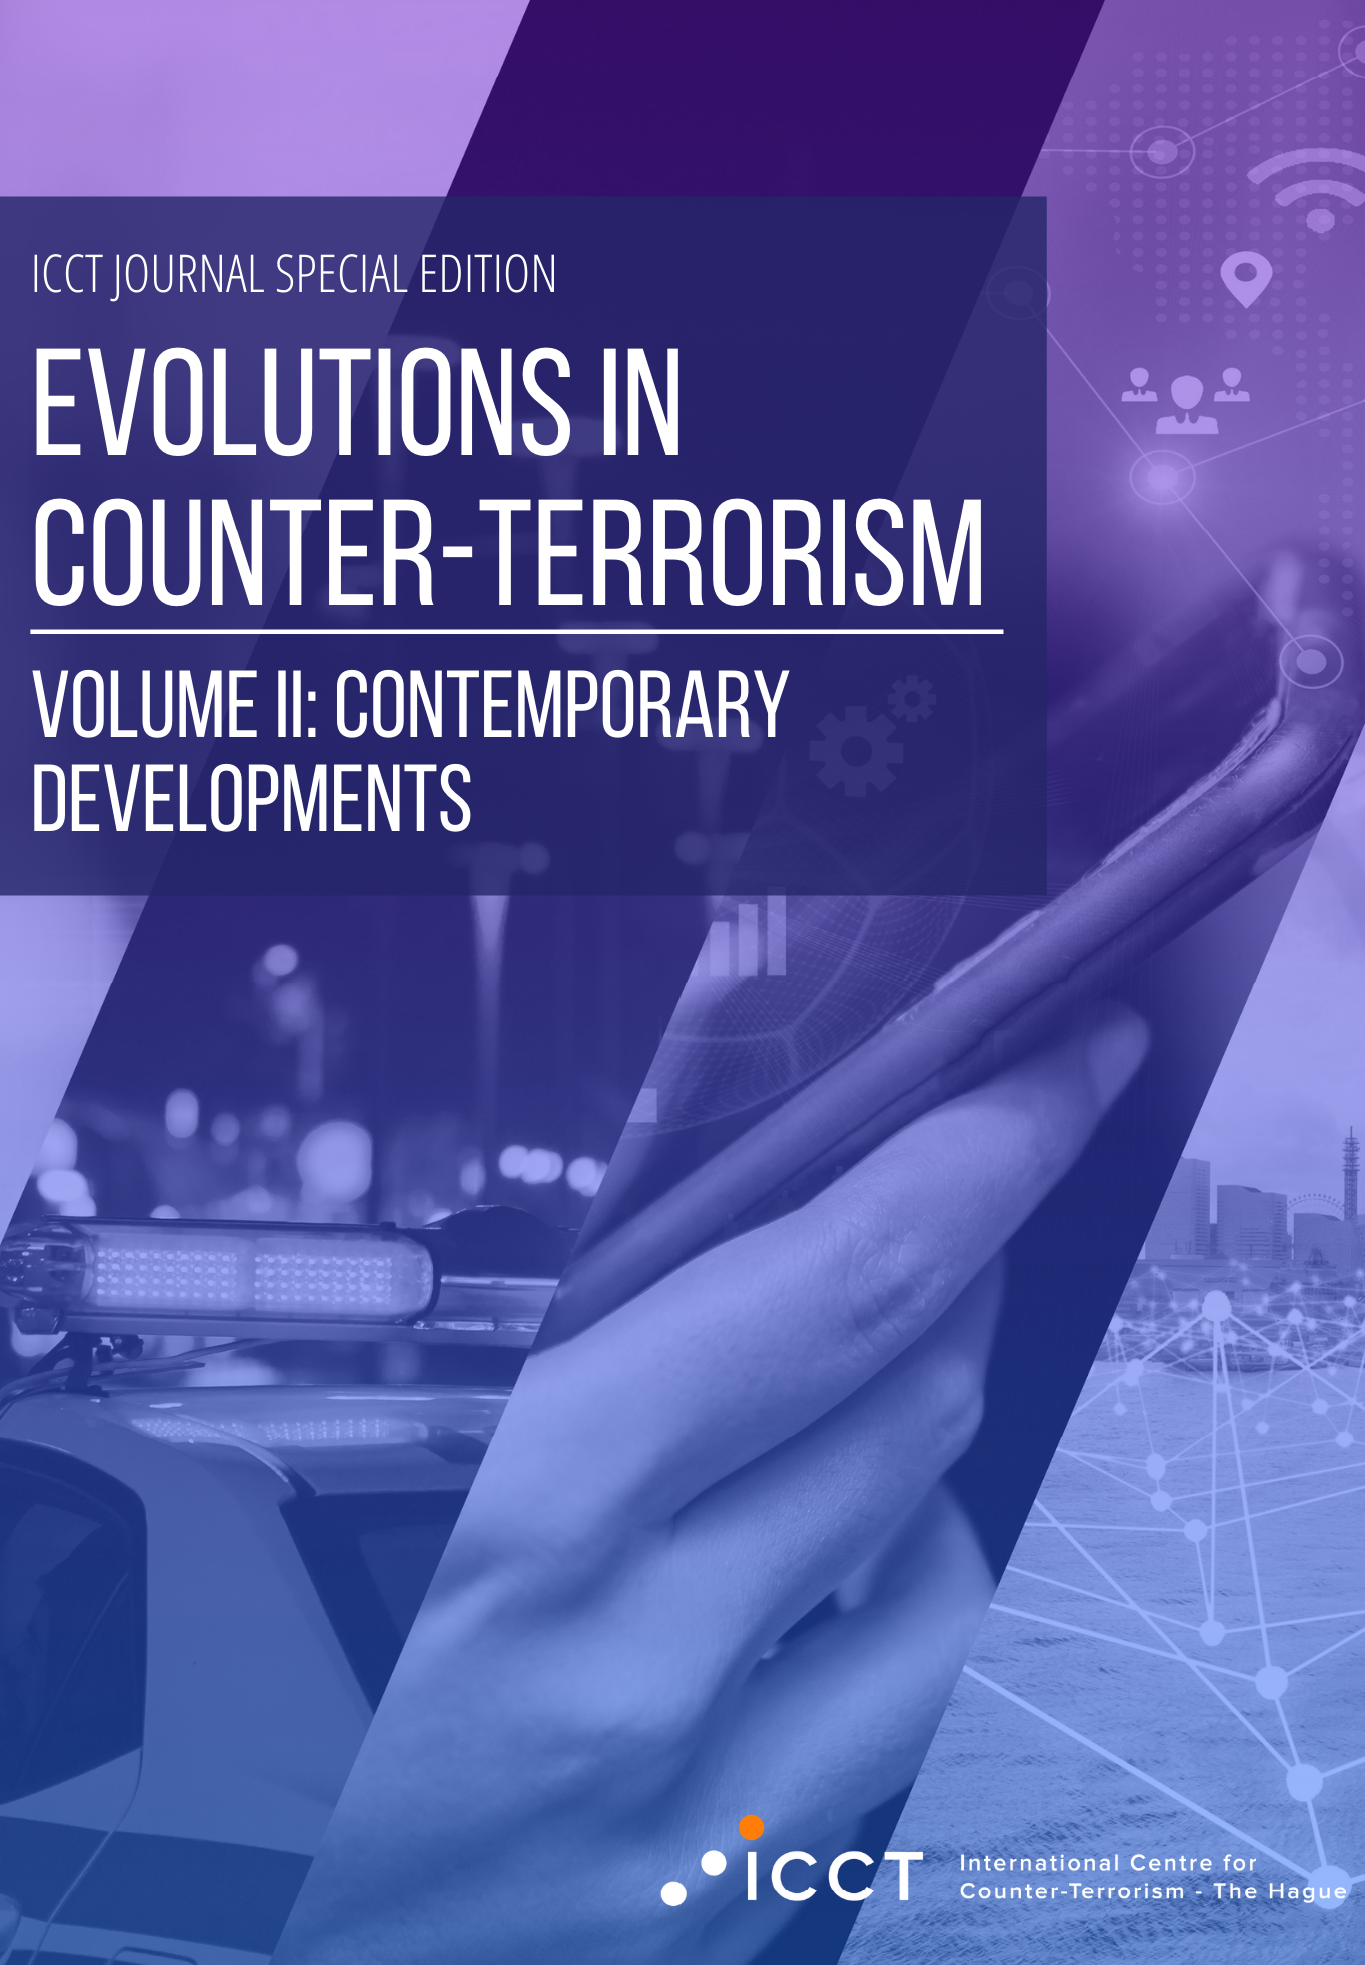 Special edition ICCT’s research journal "Evolutions in Counter-Terrorism" - Volume 2